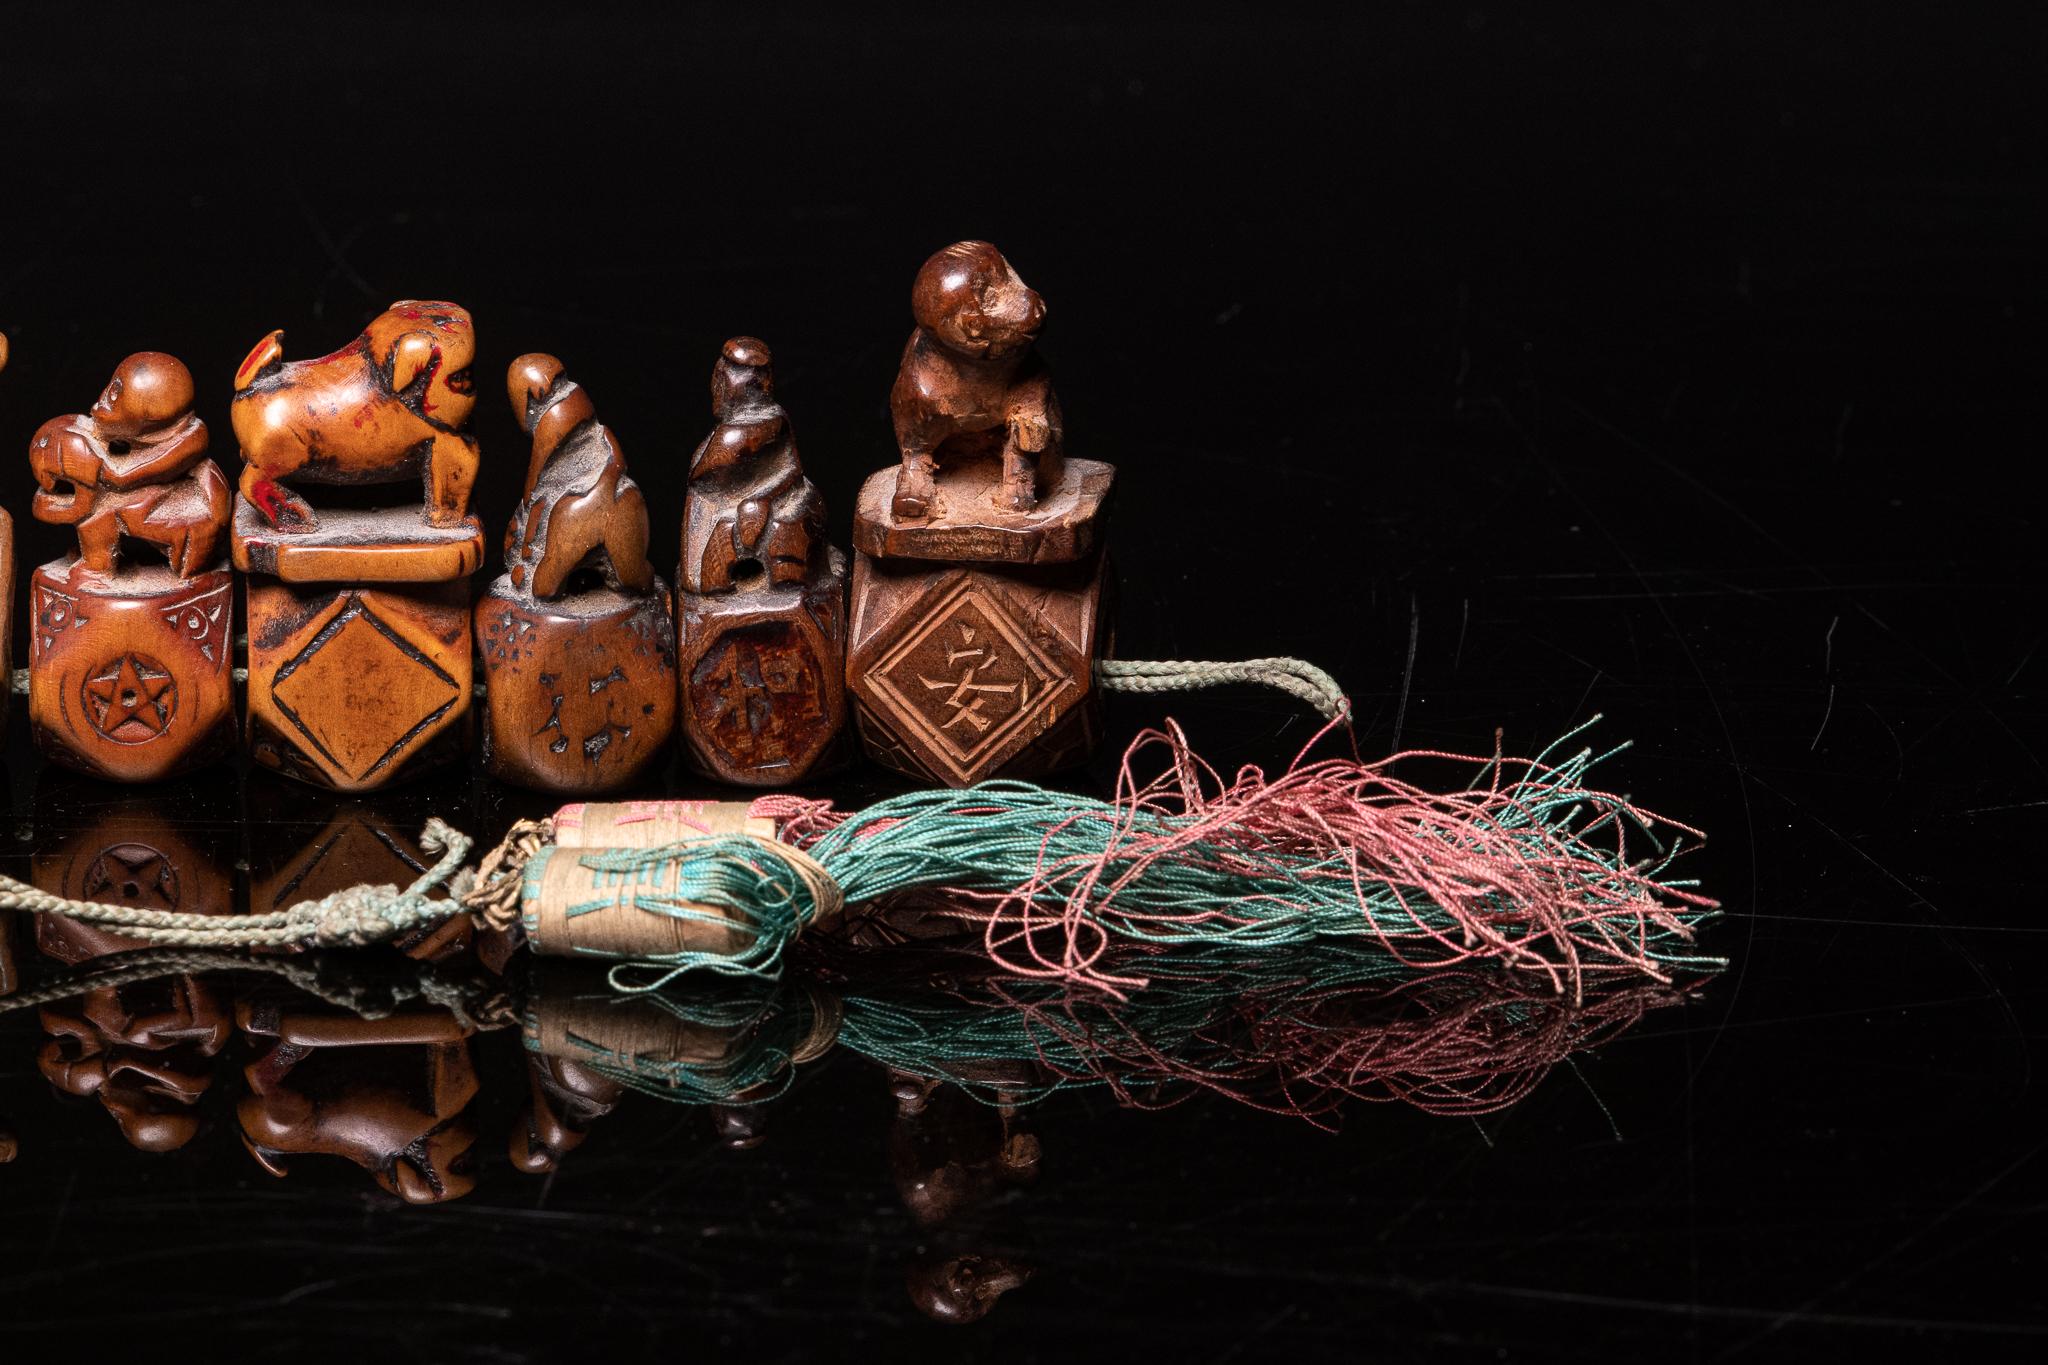 Eight Antique Chinese Tobacco Pipe Holders with Antrophomorphic Subject, made of the Wood of Fruit Trees. 

French Private Collection.